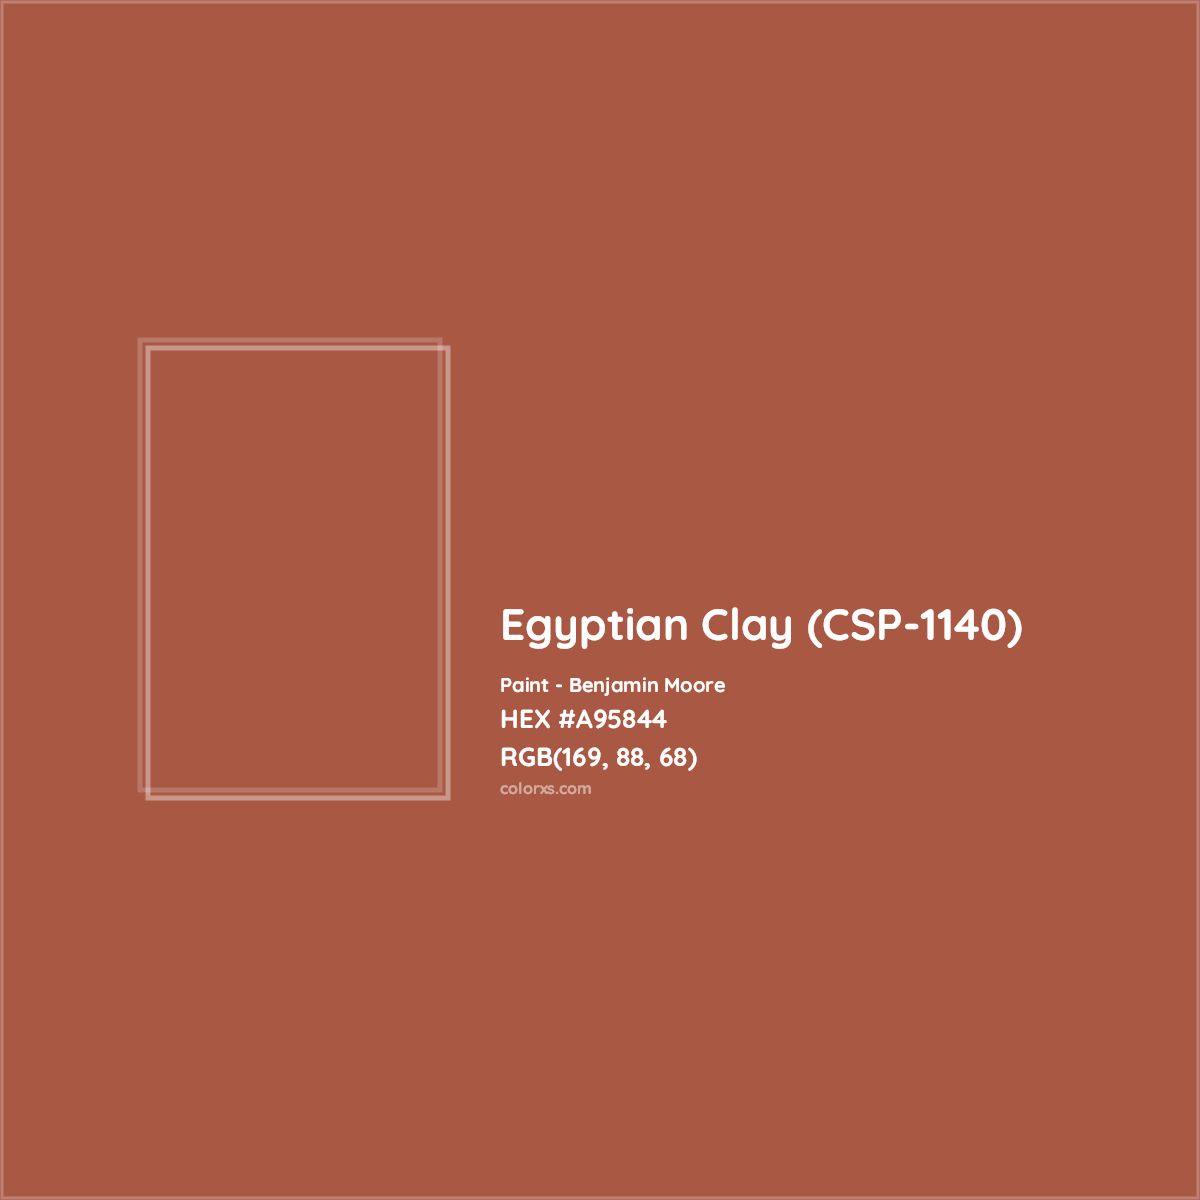 HEX #A95844 Egyptian Clay (CSP-1140) Paint Benjamin Moore - Color Code